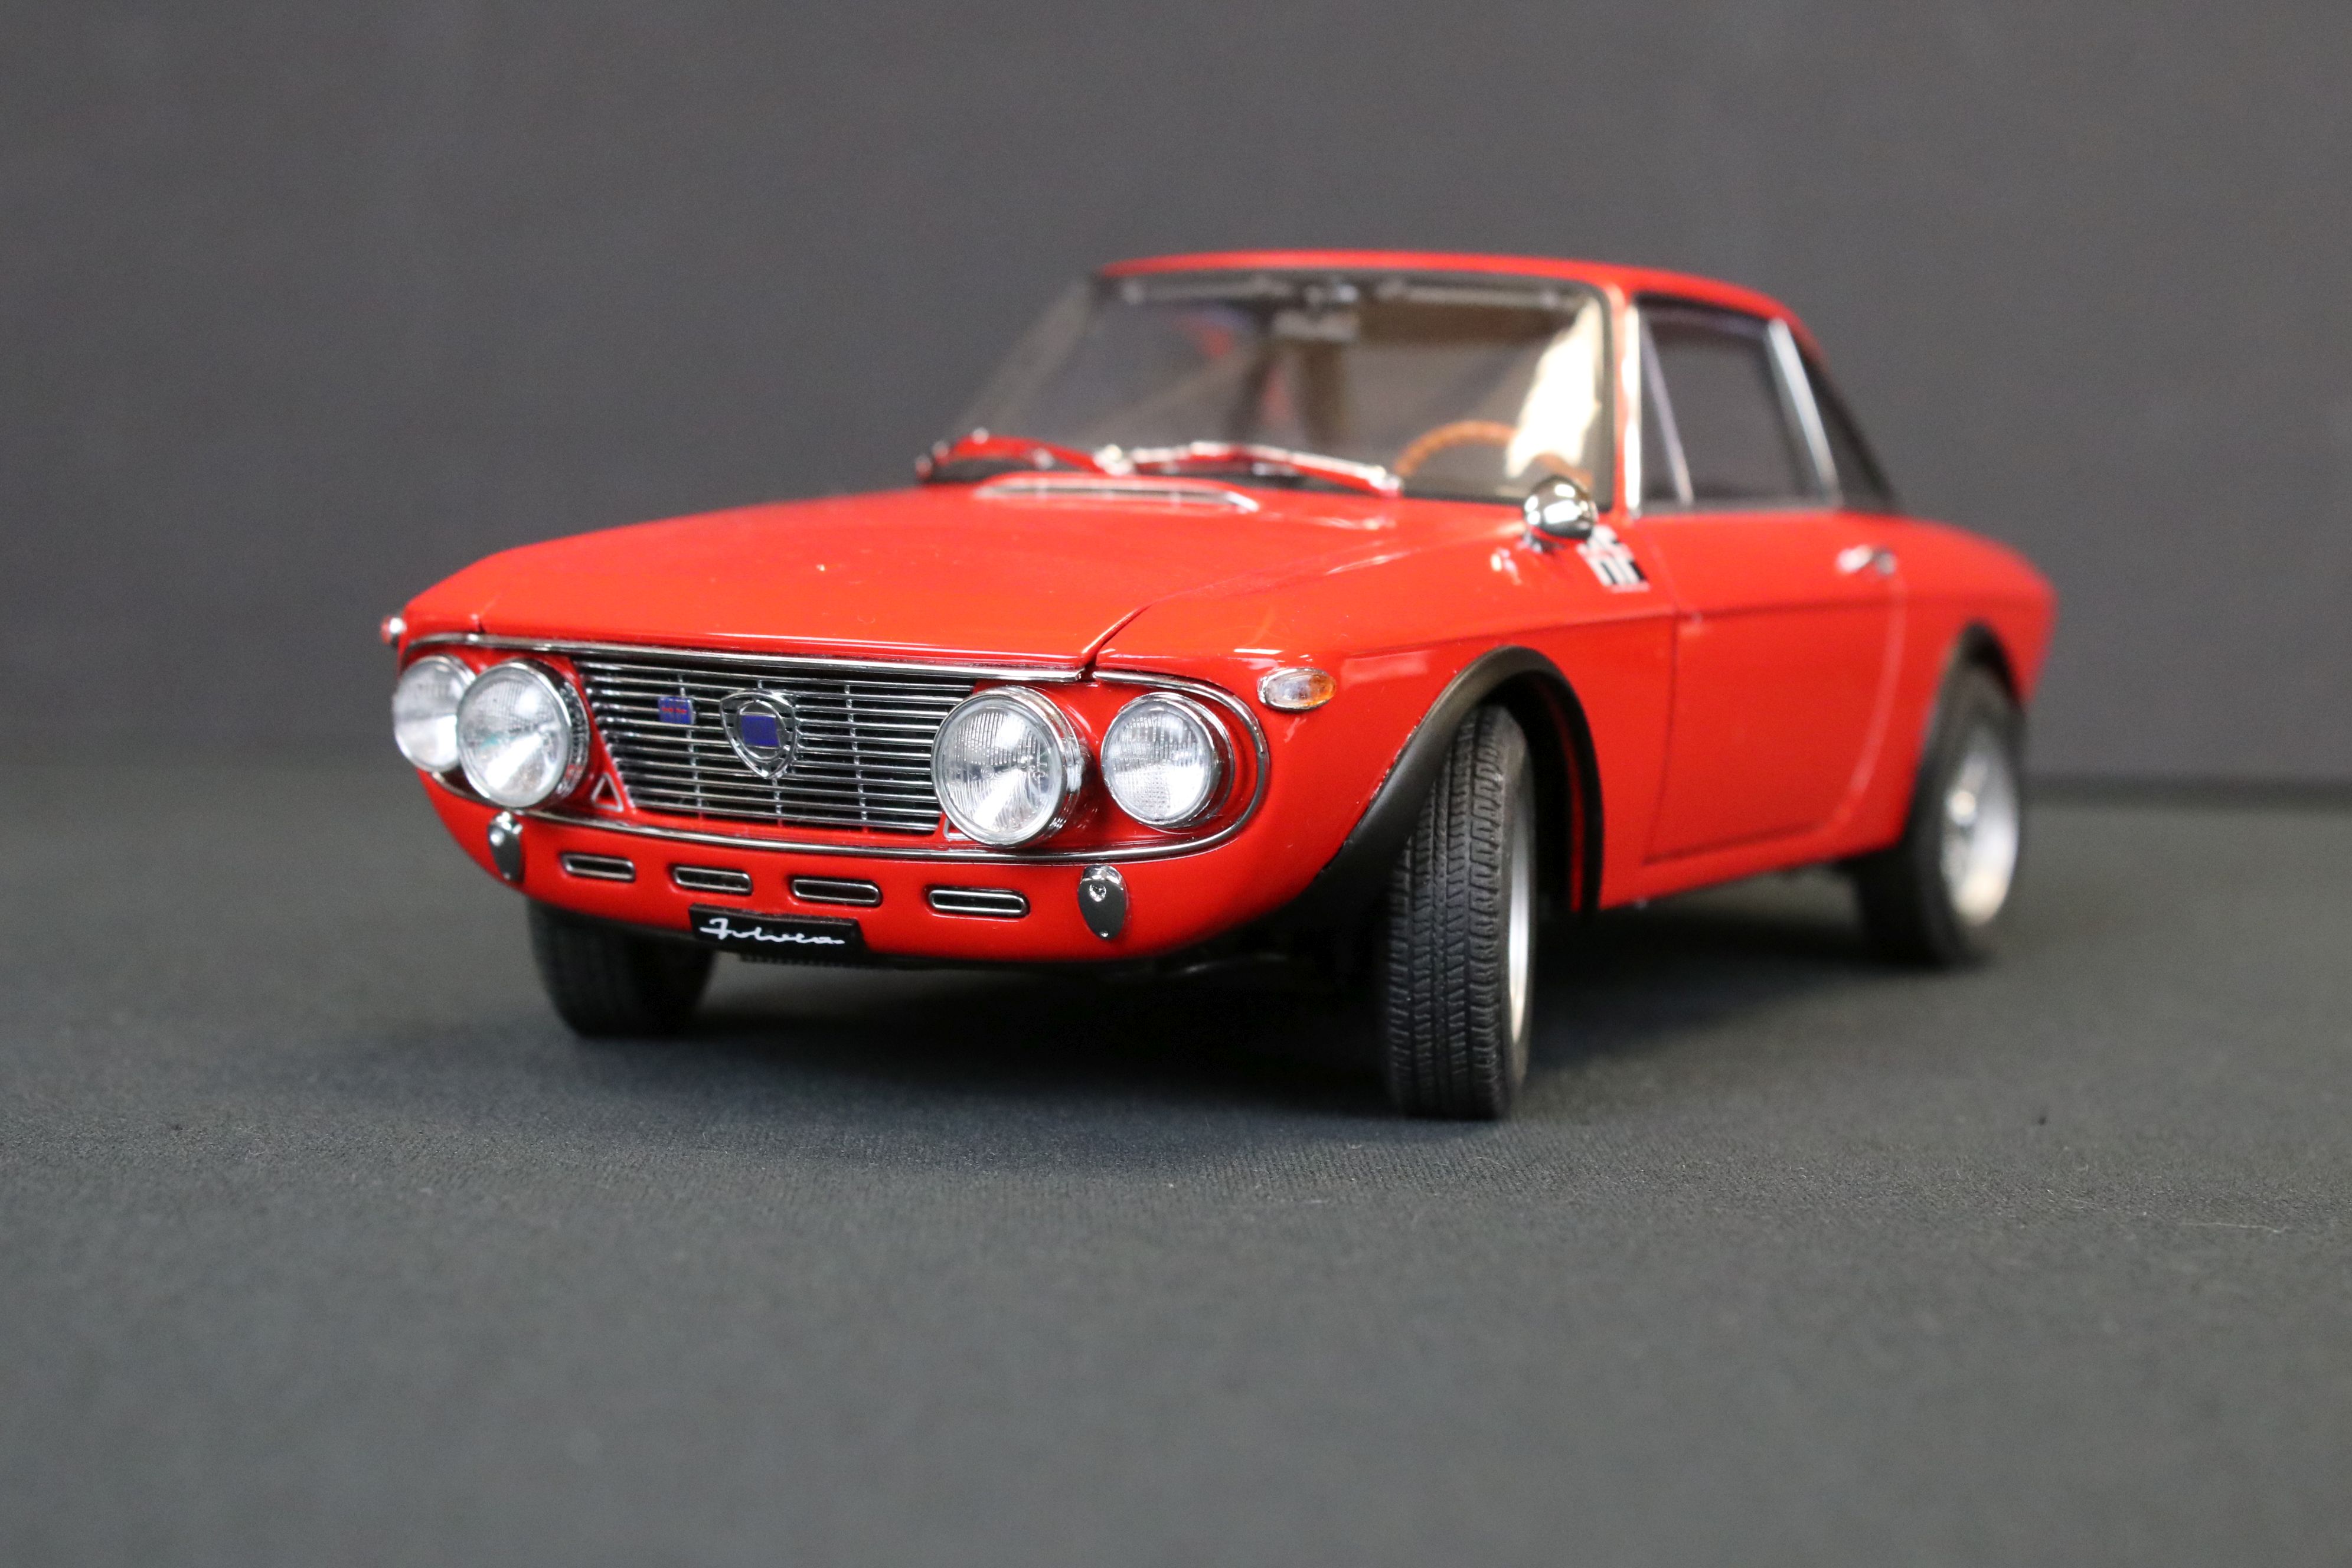 Two boxed AutoArt Millennium 1/18 diecast models to include BMW 2002 L and Lancia Fulvia 1.6HF - Image 10 of 14